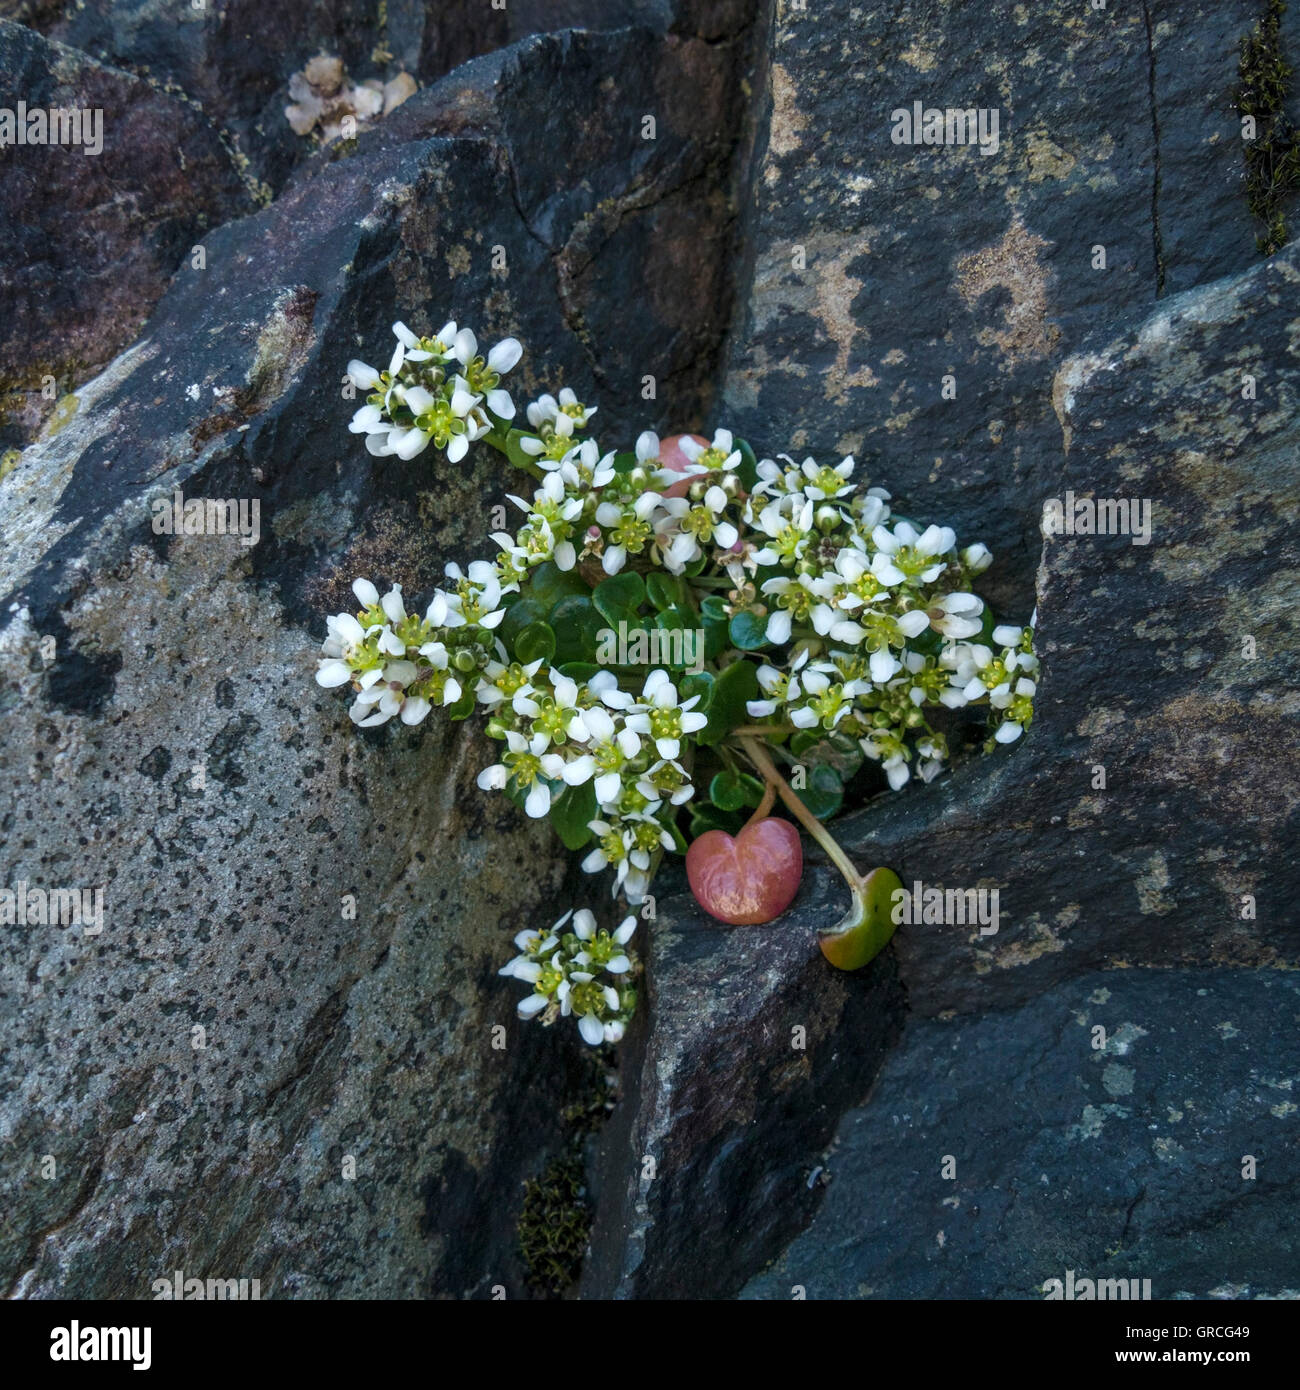 Common scurvy grass plant with white flowers growing on rocks, Isle of Colonsay, Scotland, UK. Stock Photo